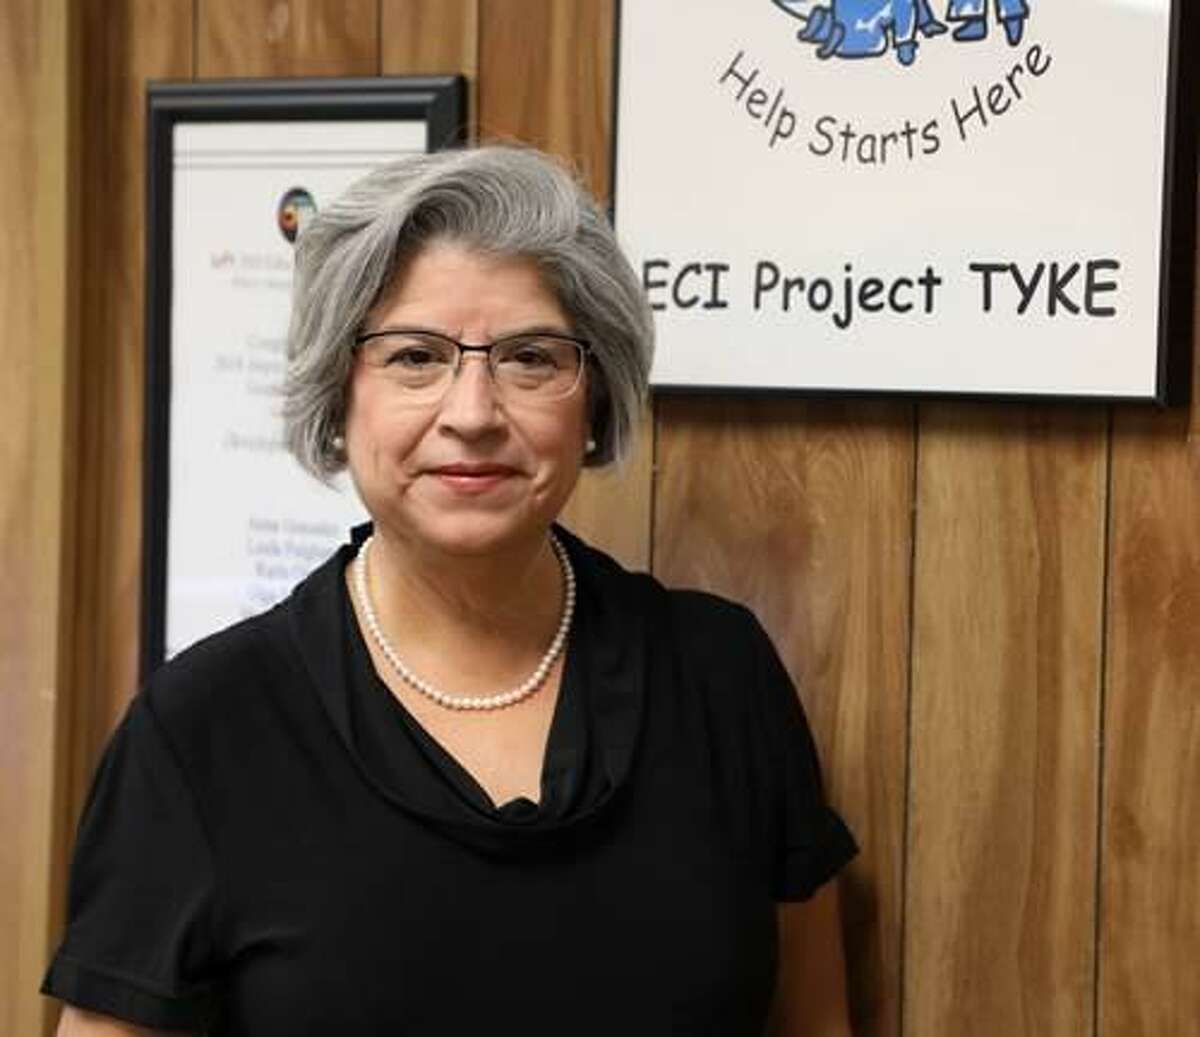 Martha Aki, director of Katy Independent School District’s Early Childhood Intervention Project TYKE program, has been working with the program for 28 years. She is set to retire in December. On Monday, Oct. 26, a naming advisory committee recommended that the former L.D. Robinson Pavilion be named “Martha Aki ECI Project TYKE.”